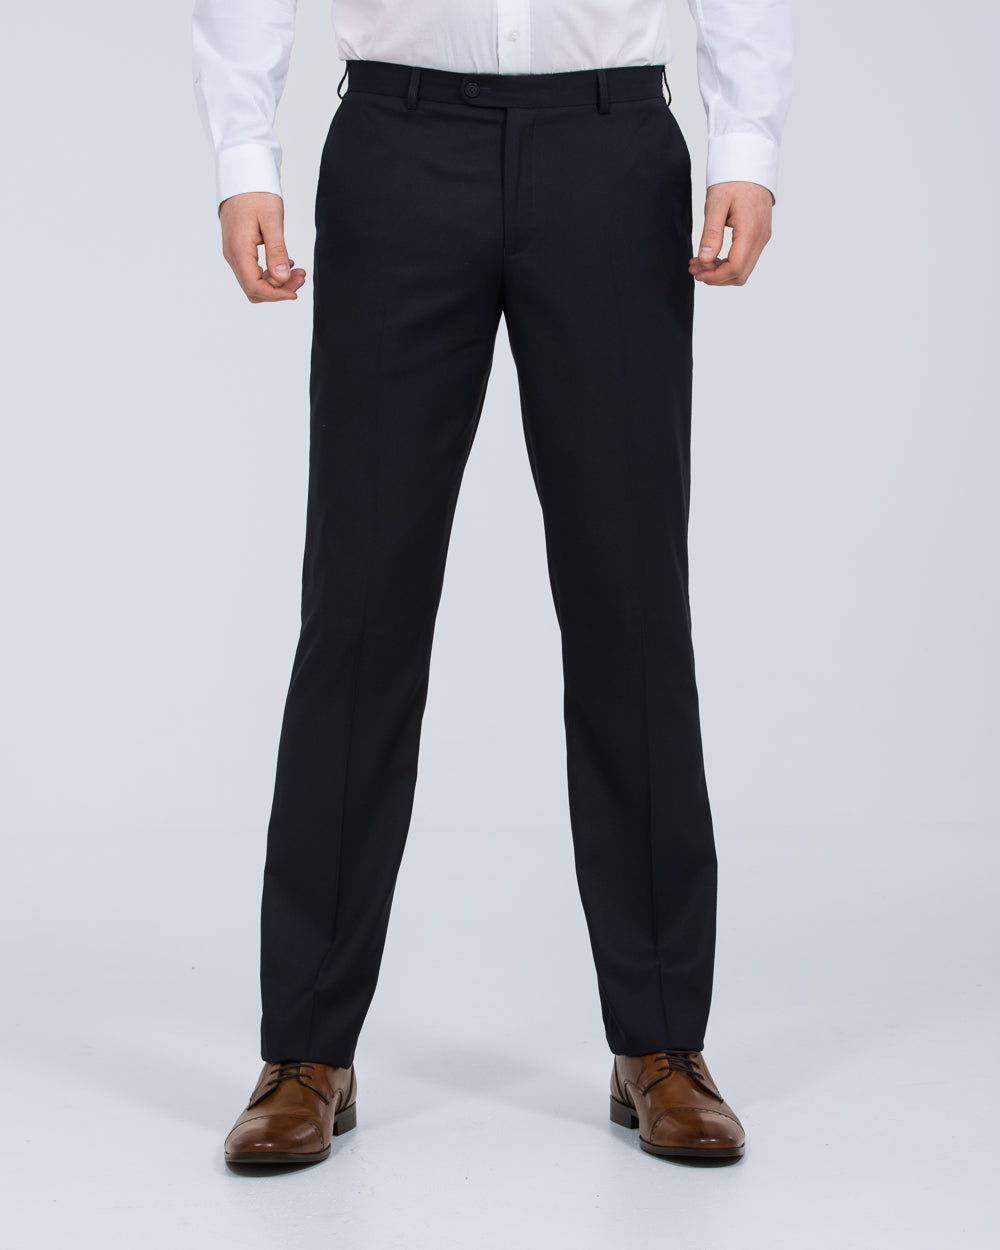 Skopes Romulus Slim Fit Tall Lyfcycle Trousers (navy)